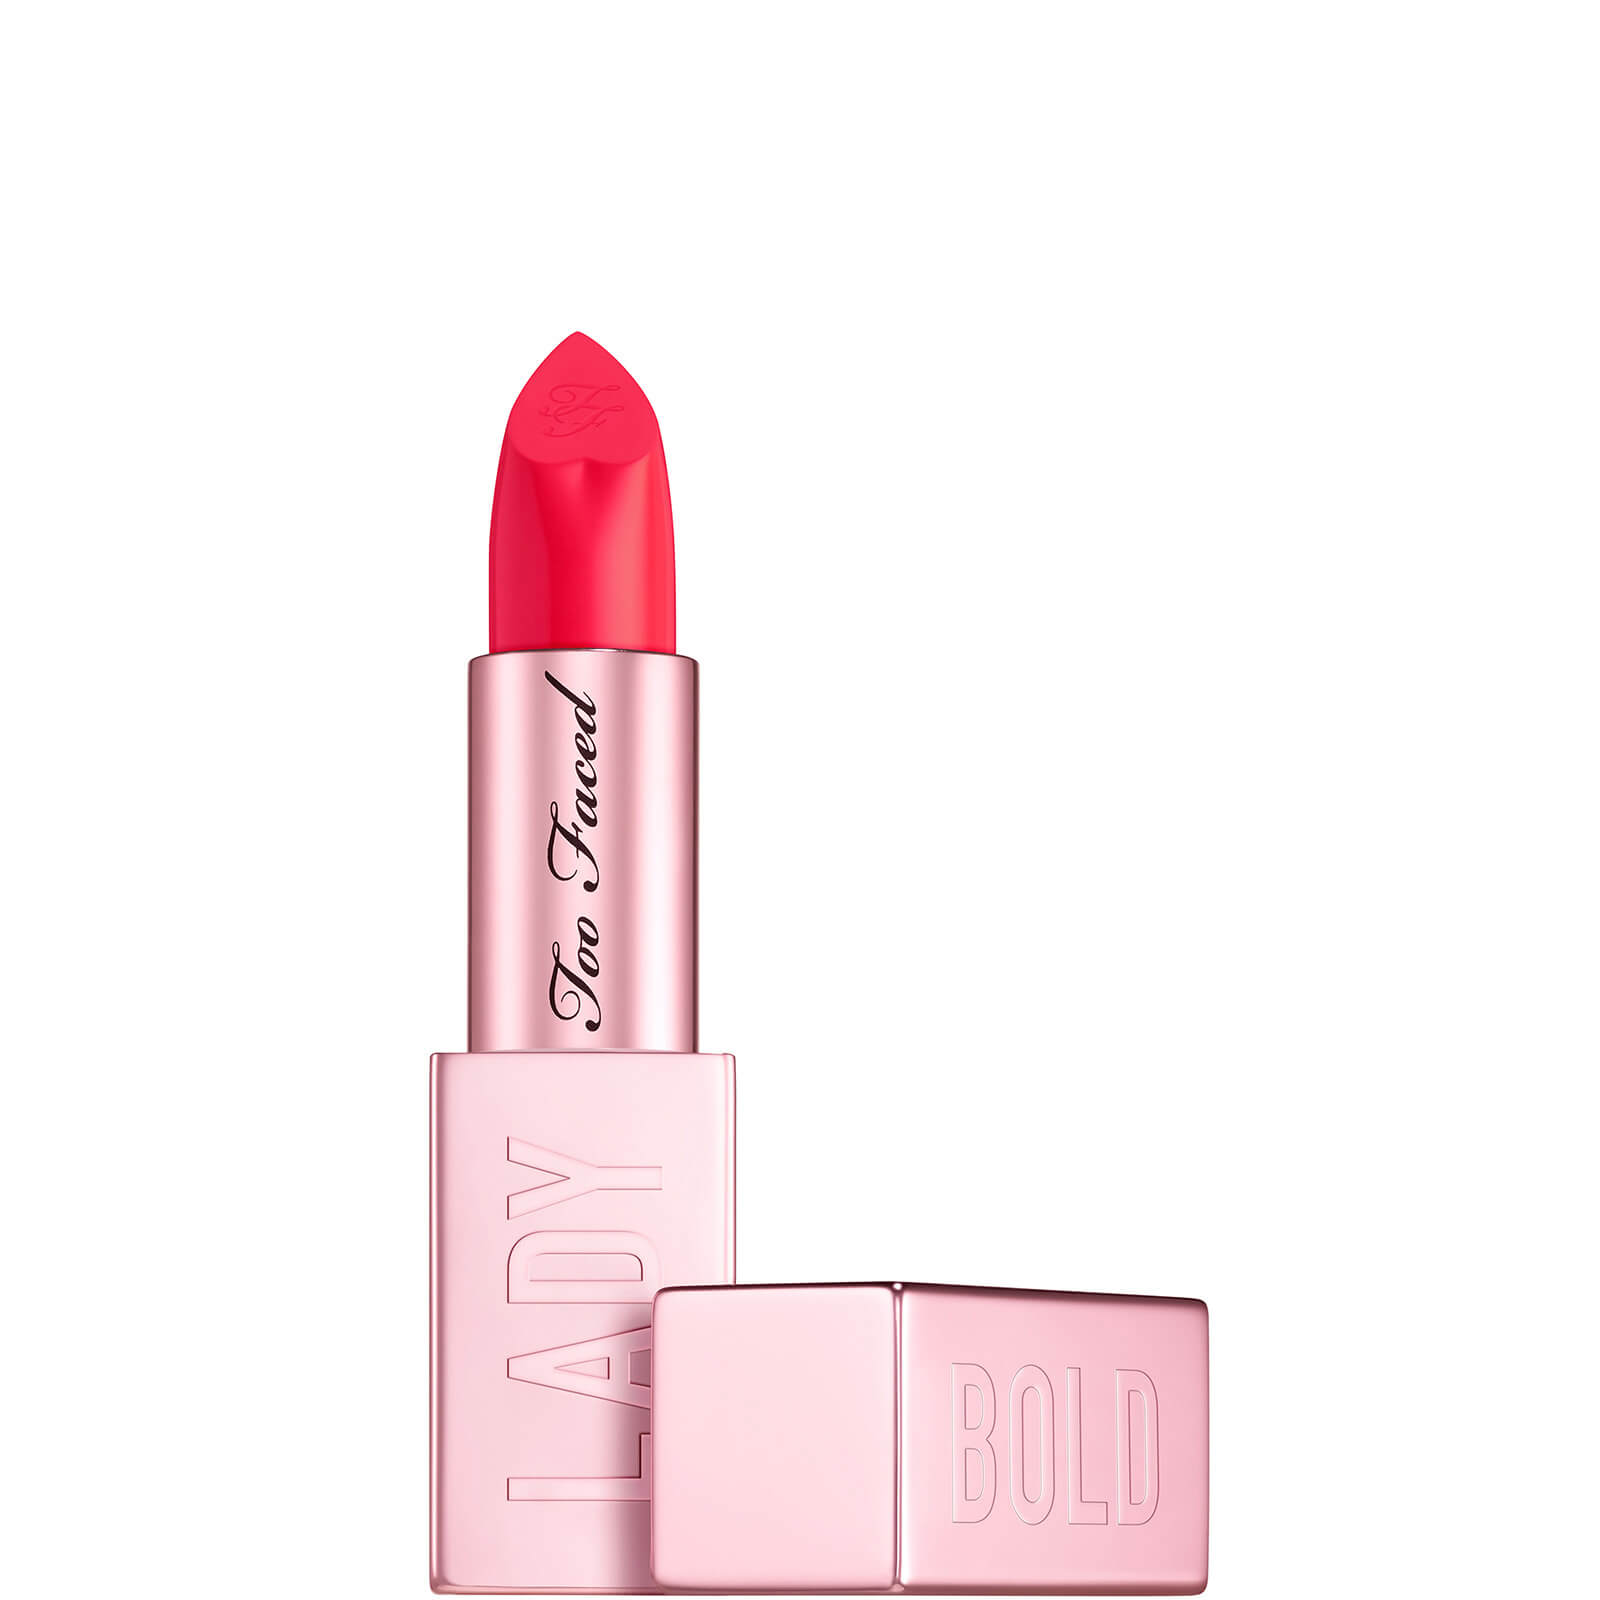 Too Faced Lady Bold Em-Power Pigment Lipstick 4g (Various Shades) - Unafraid